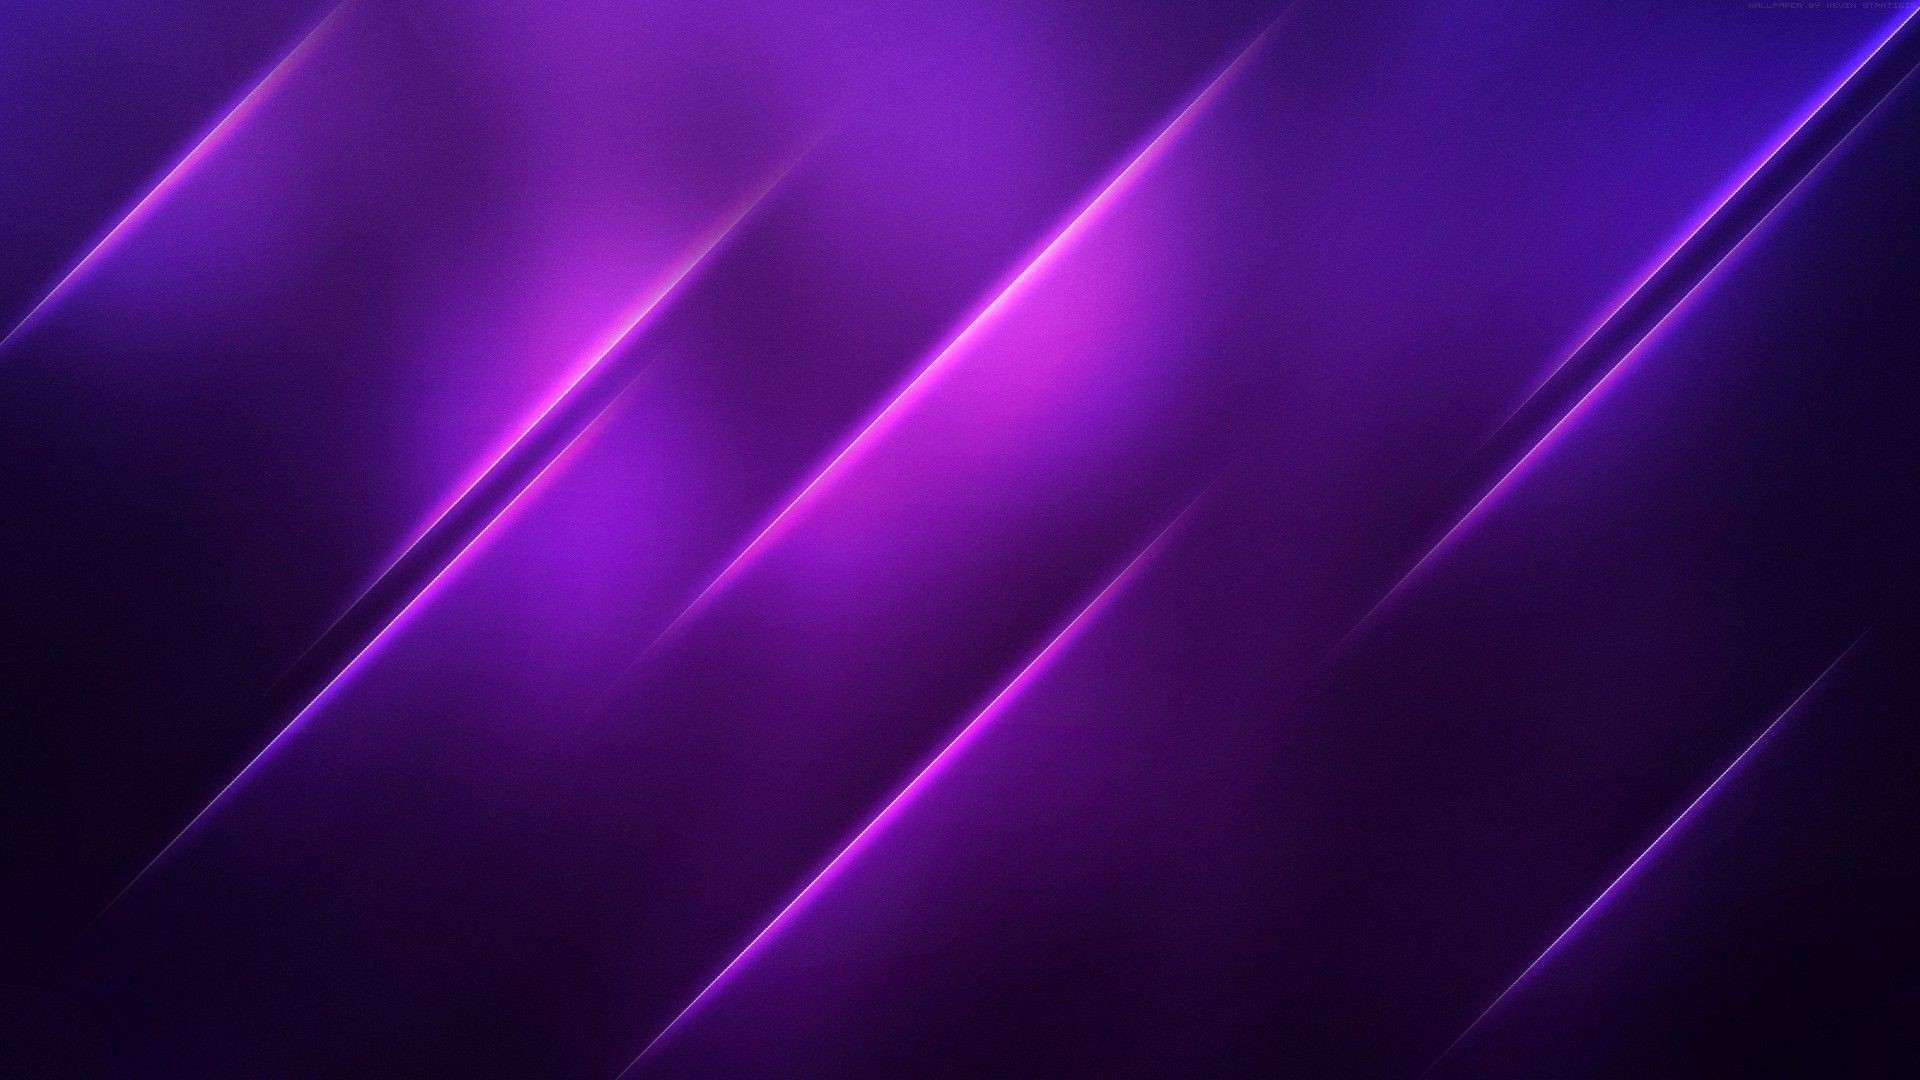 1920x1080 HD Backgrounds Solid Color Free Download.